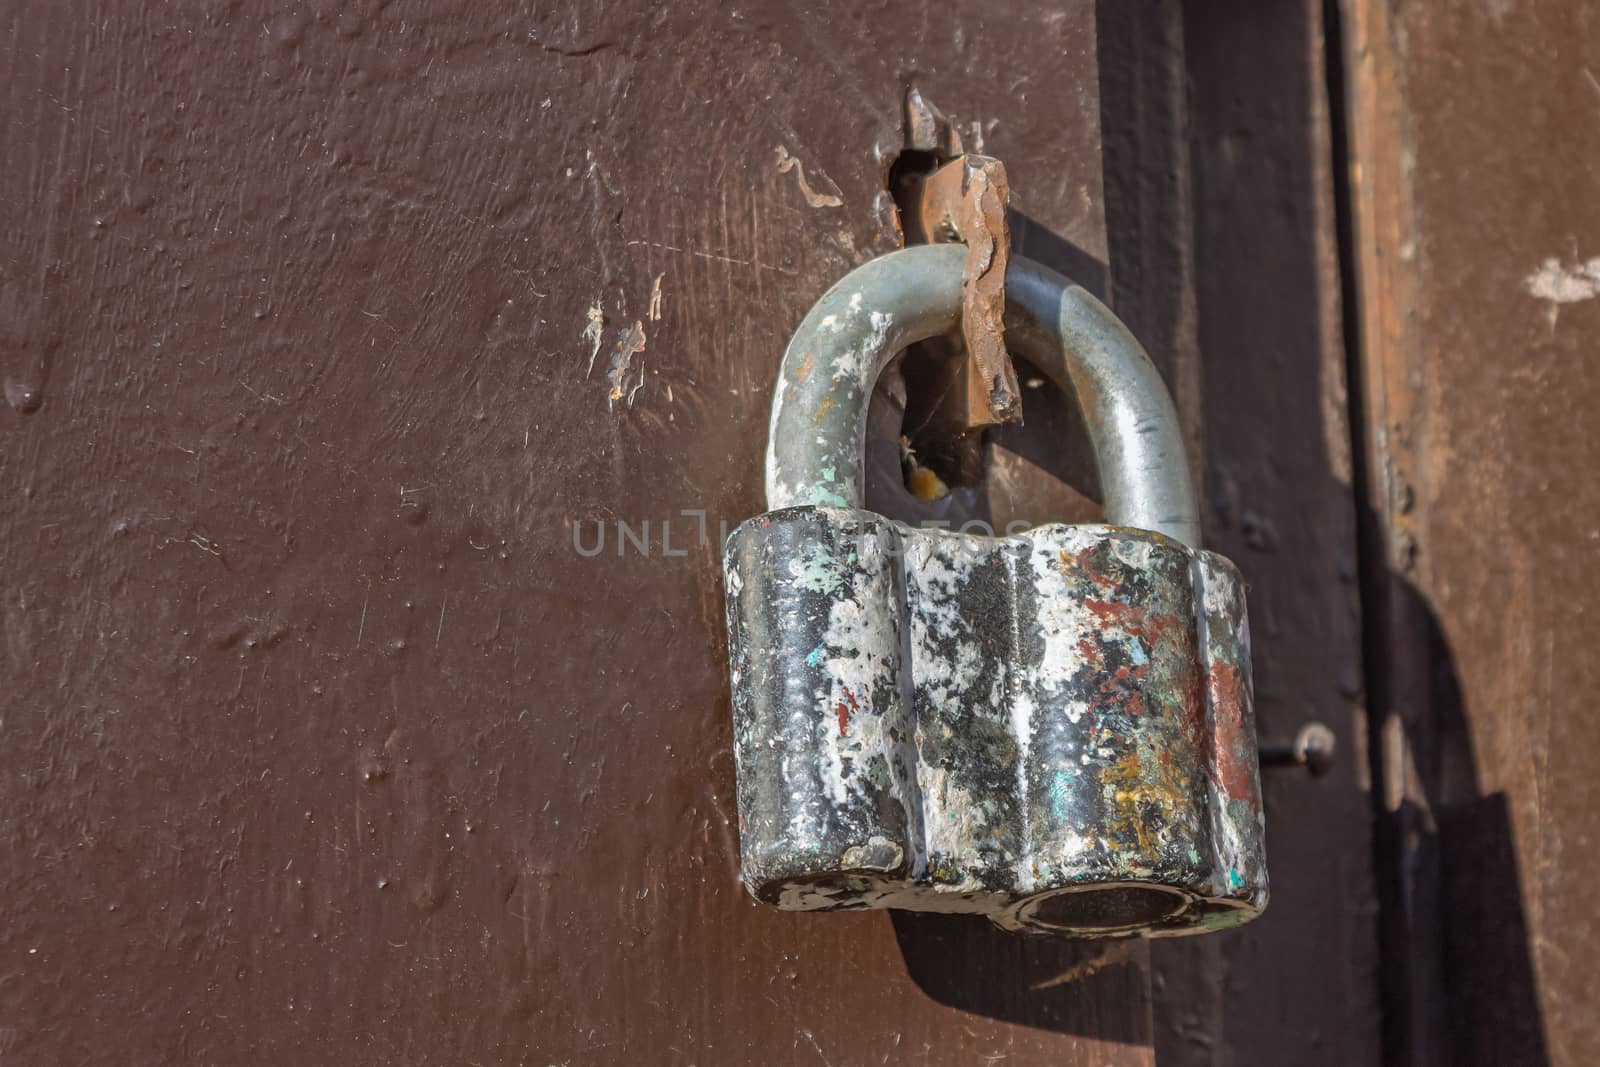 An old but reliable padlock locks the iron gates of the hangar. The lock keeps the doors locked